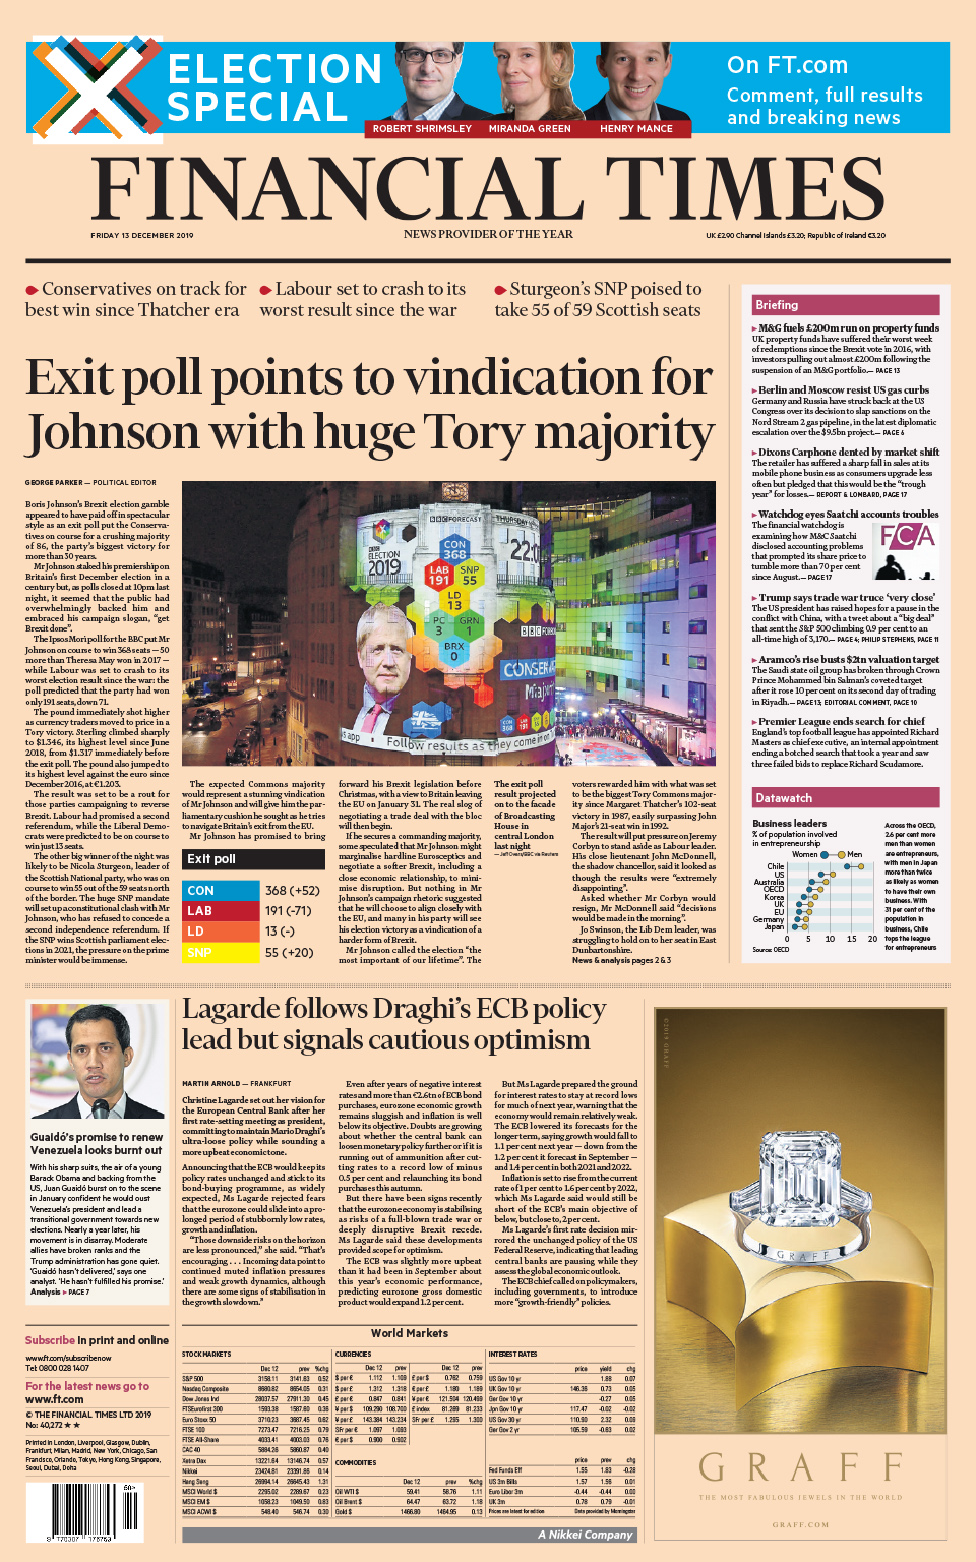 The Financial Times front page